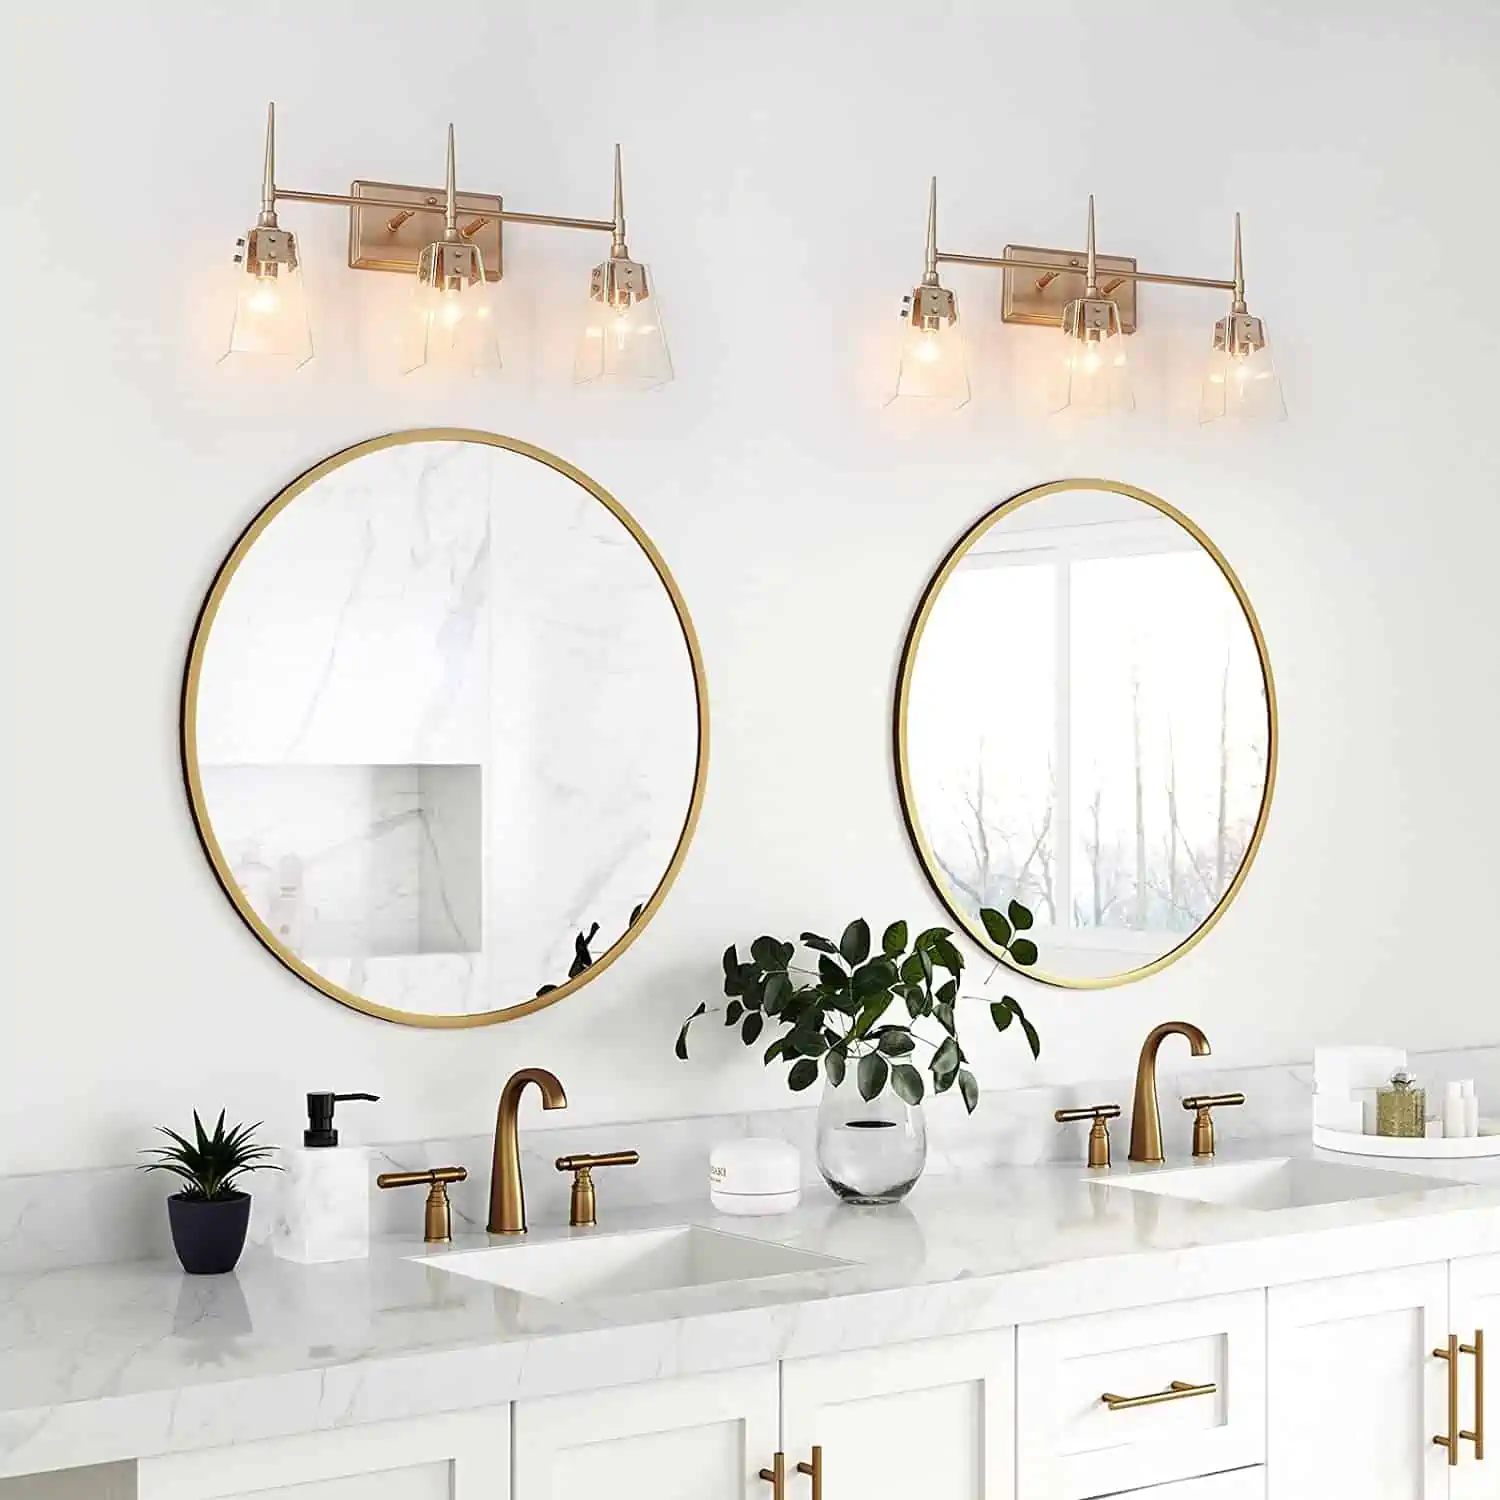 50 Lighting fixtures for bathroom you can't go wrong with (Buy now)